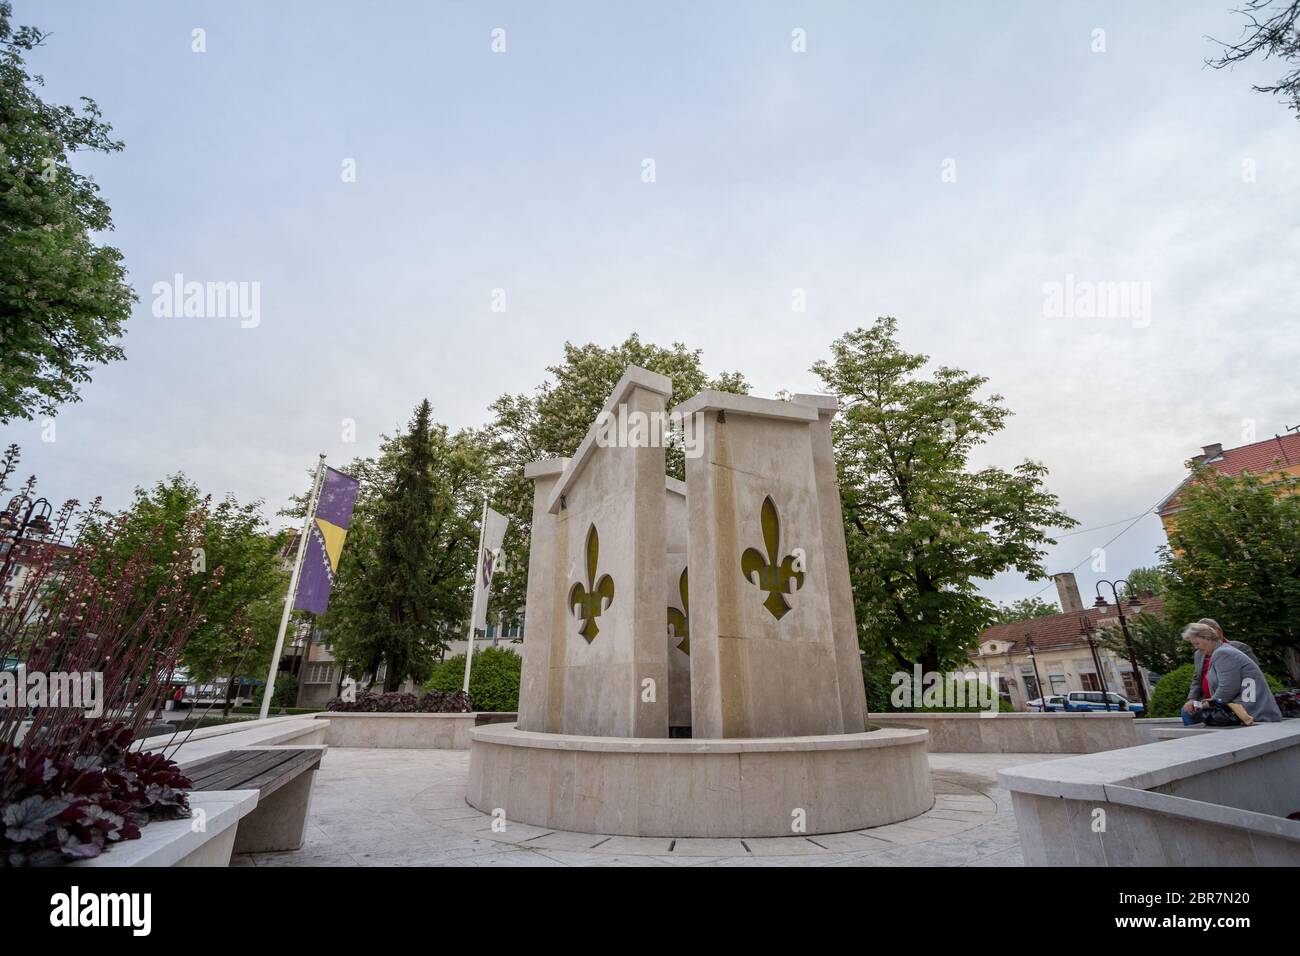 BRCKO, BOSNIA, MAY 6, 2017: Bosnian War Memorial, dedicated to the bosniak victims of the wars of 1992-1995 in Bosnia and Herzegovina.  Picture of a w Stock Photo